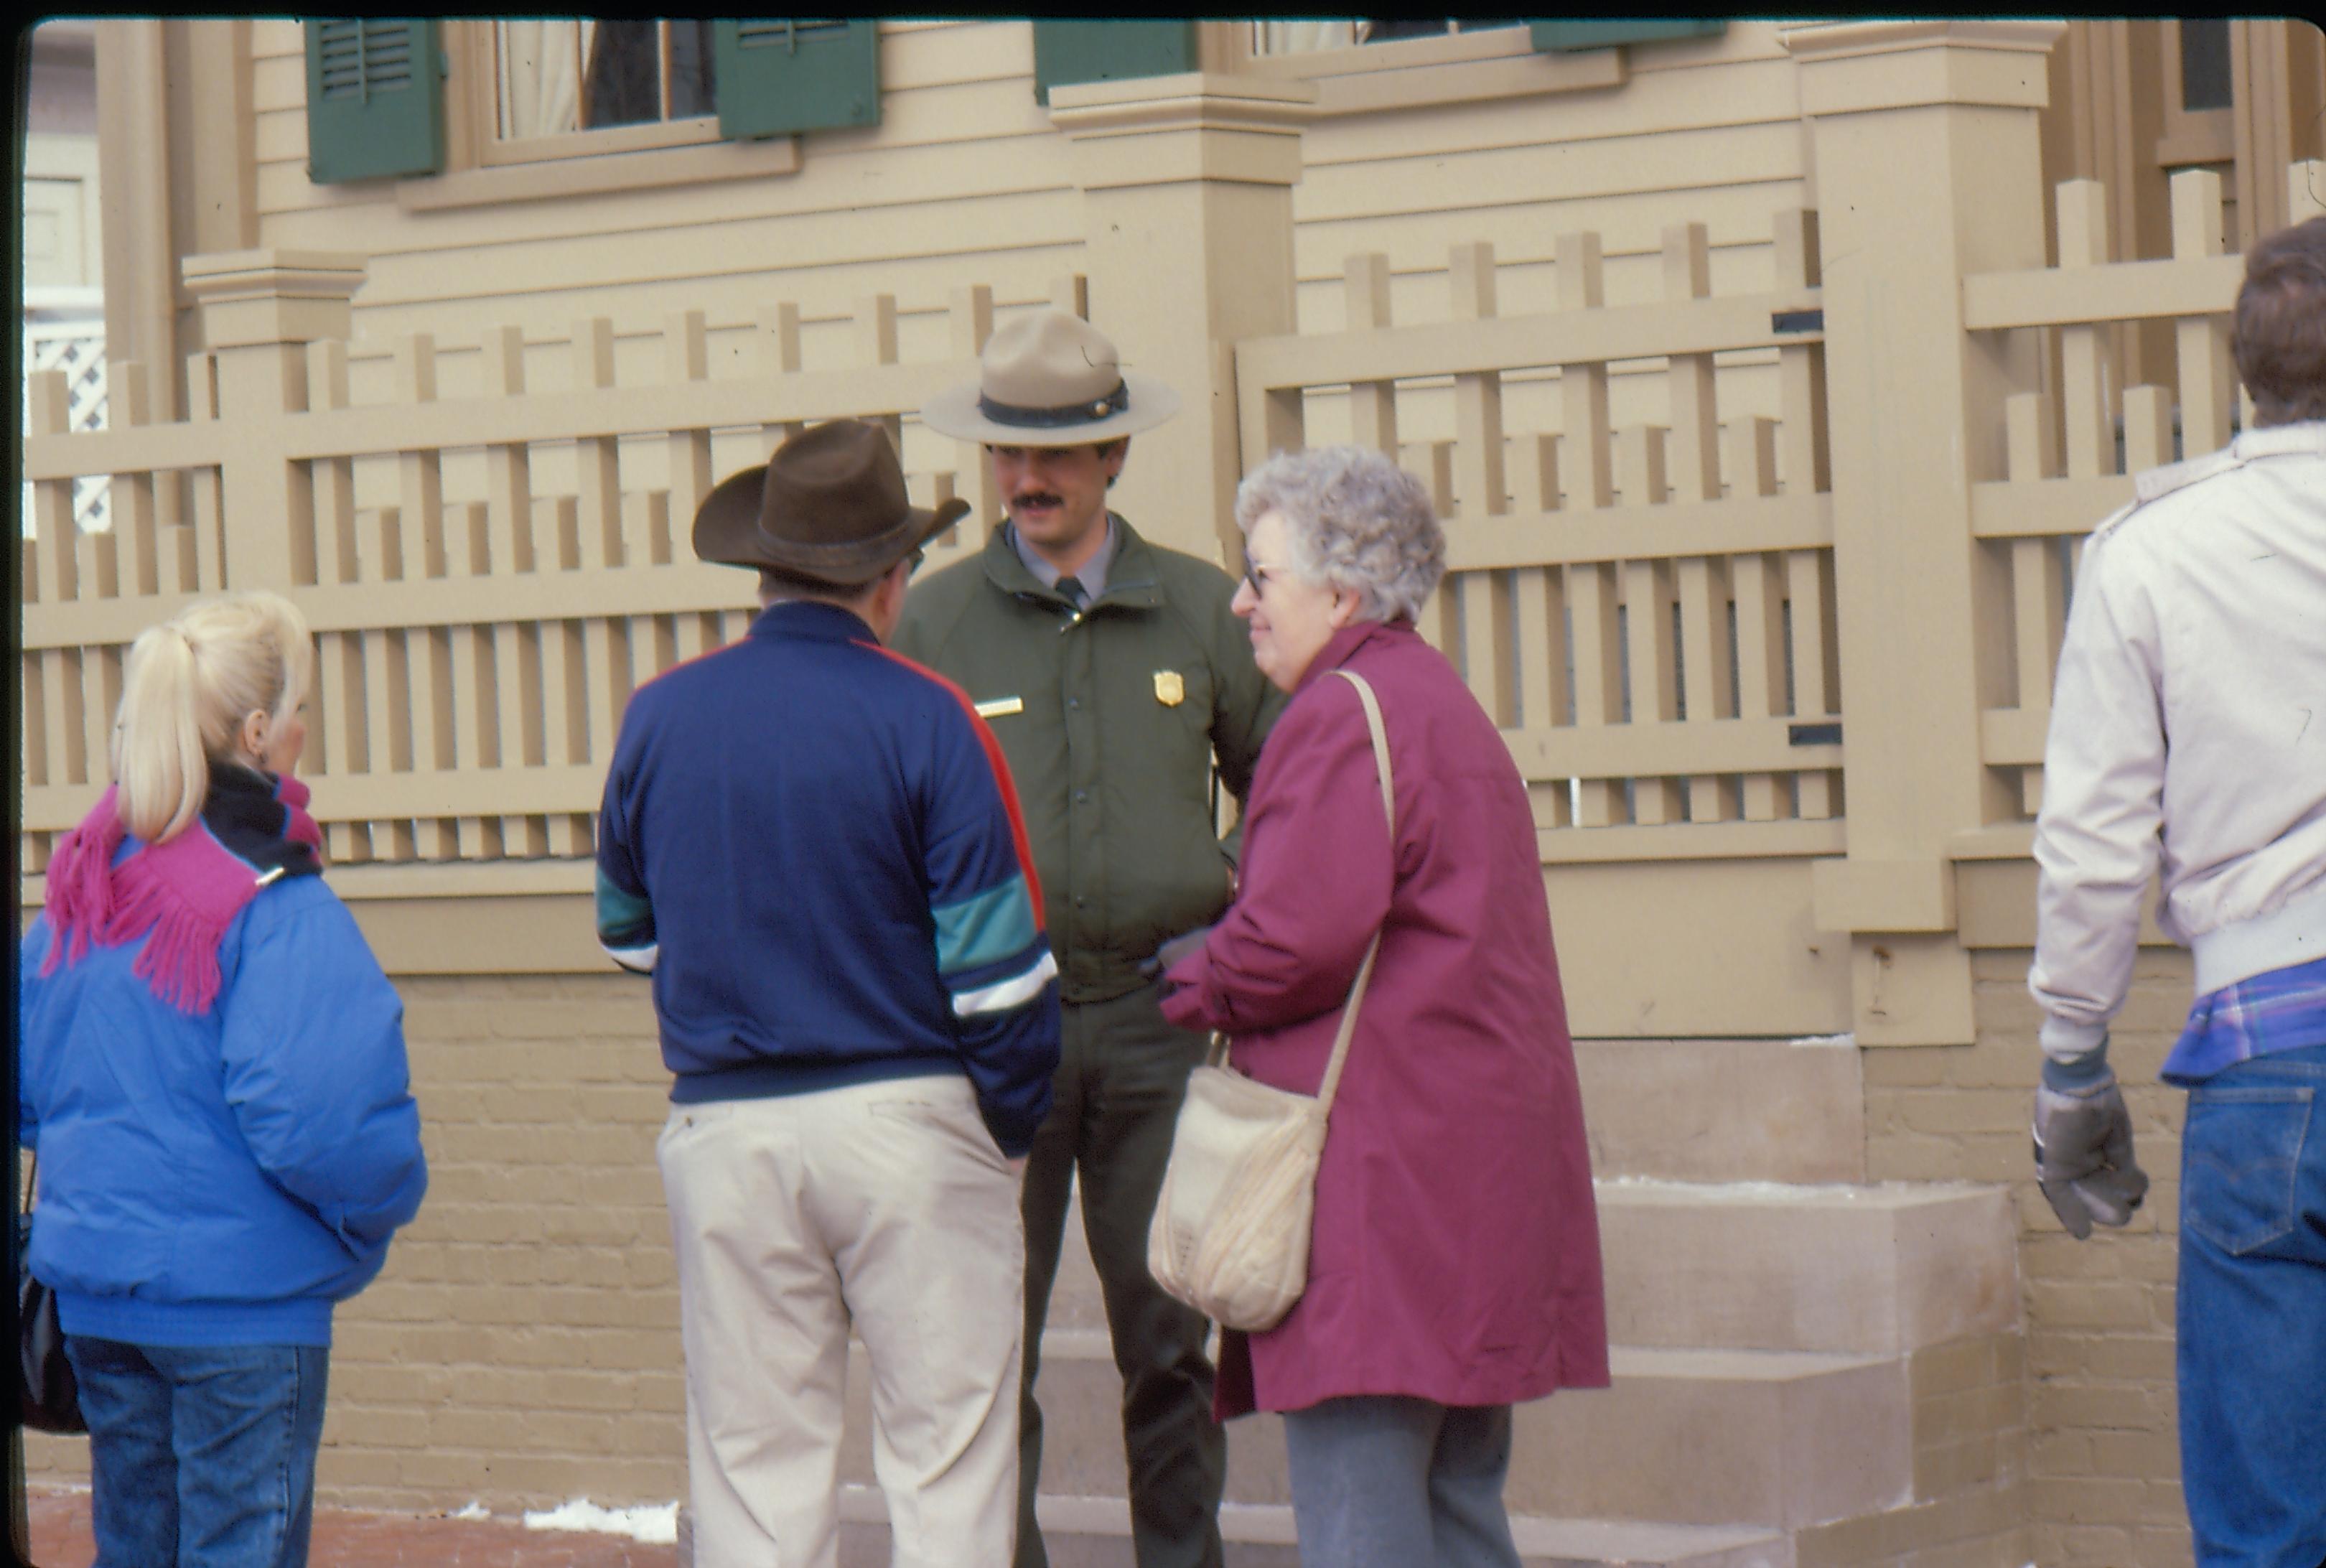 Visitors speak to a NPS ranger outside of the Lincoln Home front entrance, either before or after visiting hours. Photographer facing north east.